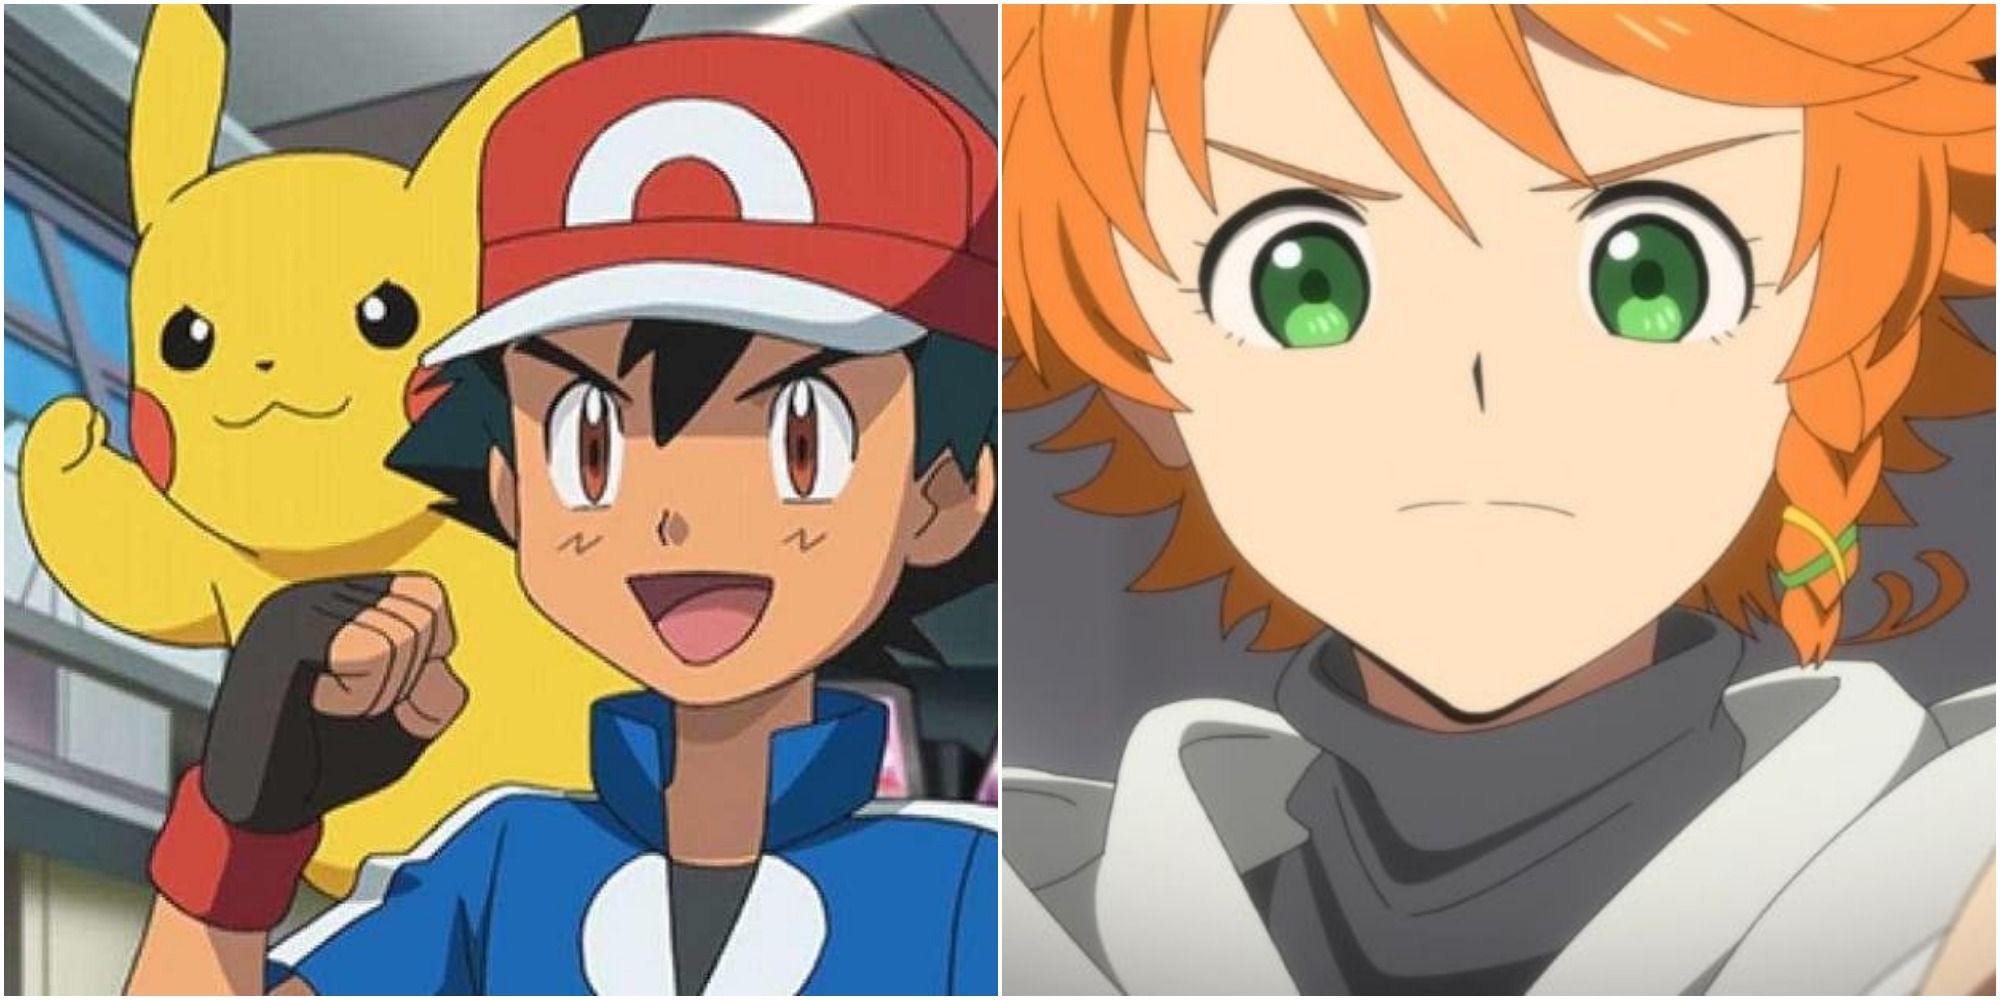 Ash and Emma, two child protagonists of anime